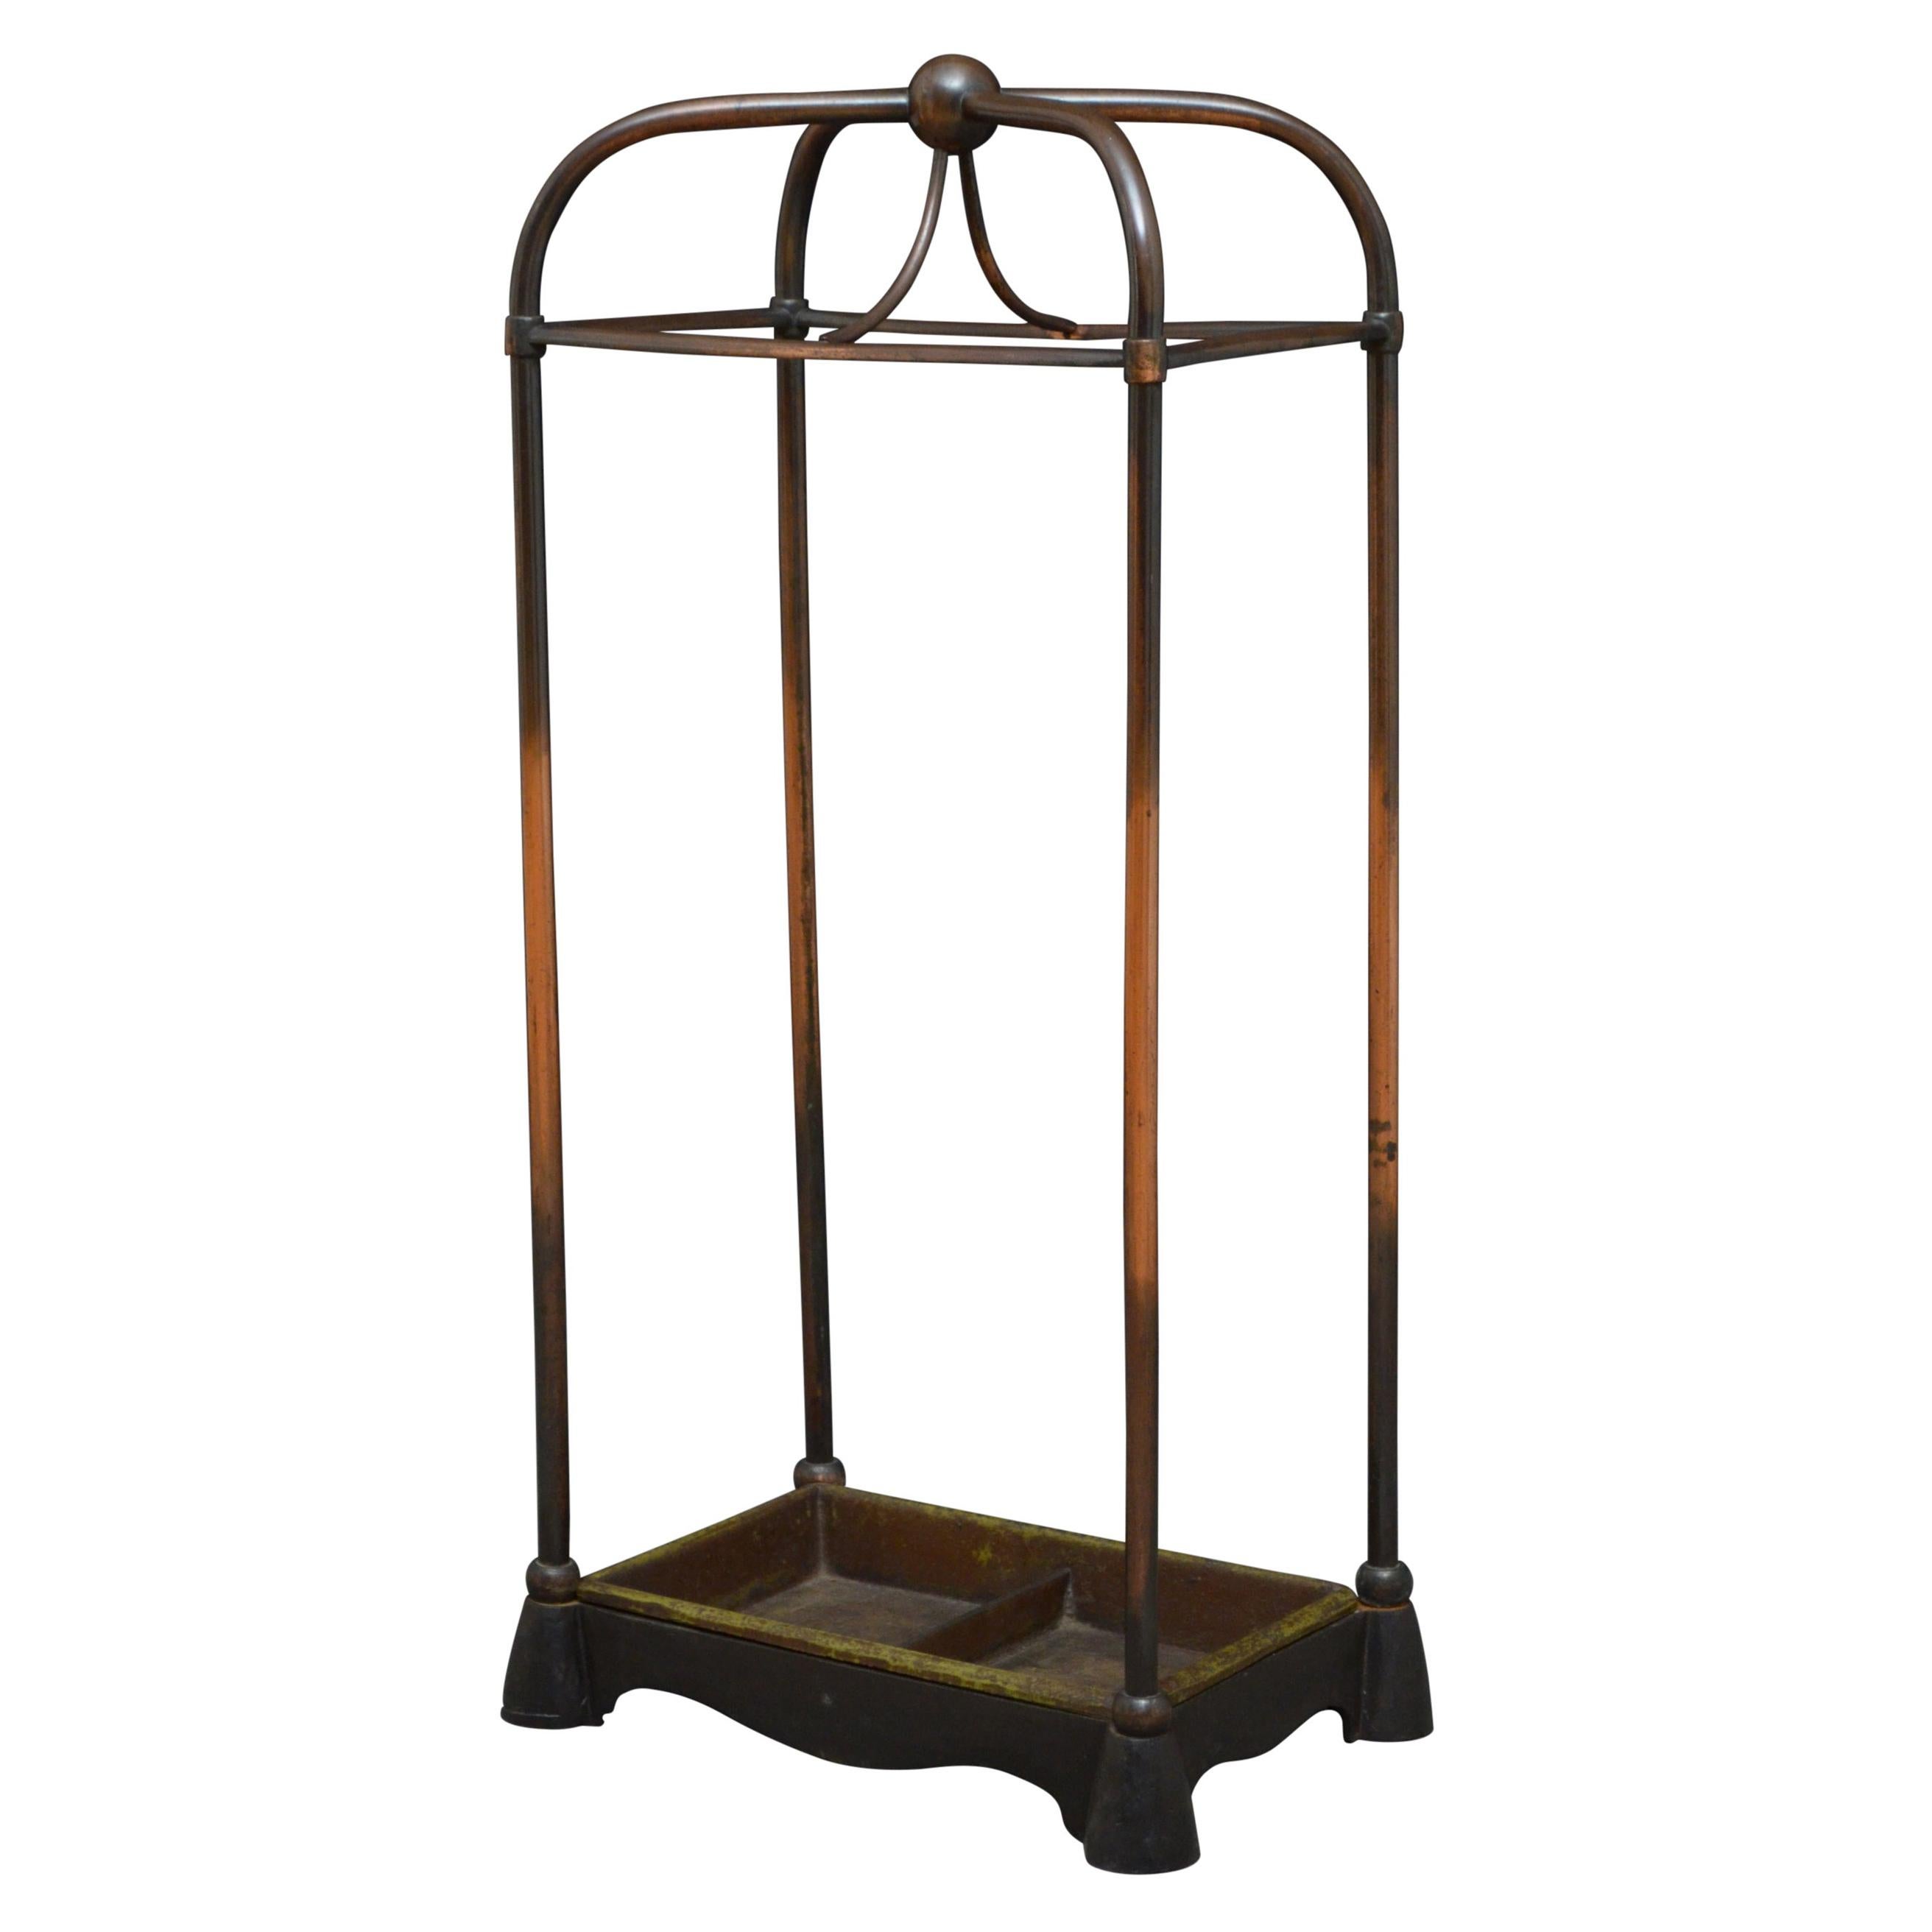 William Tonks and Sons Umbrella Stand For Sale